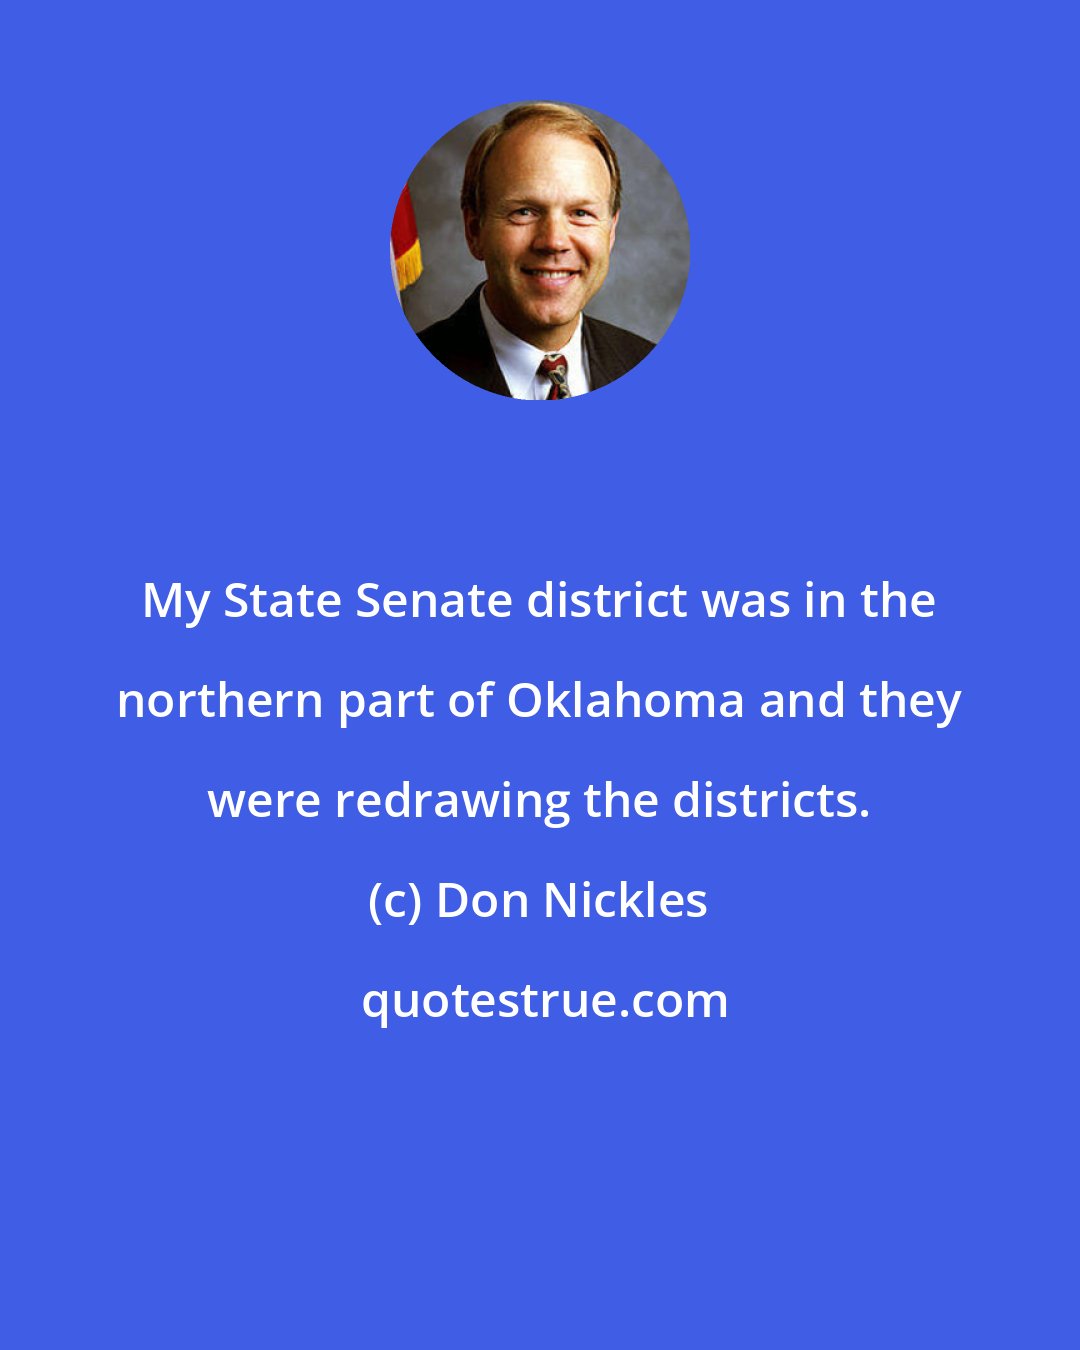 Don Nickles: My State Senate district was in the northern part of Oklahoma and they were redrawing the districts.